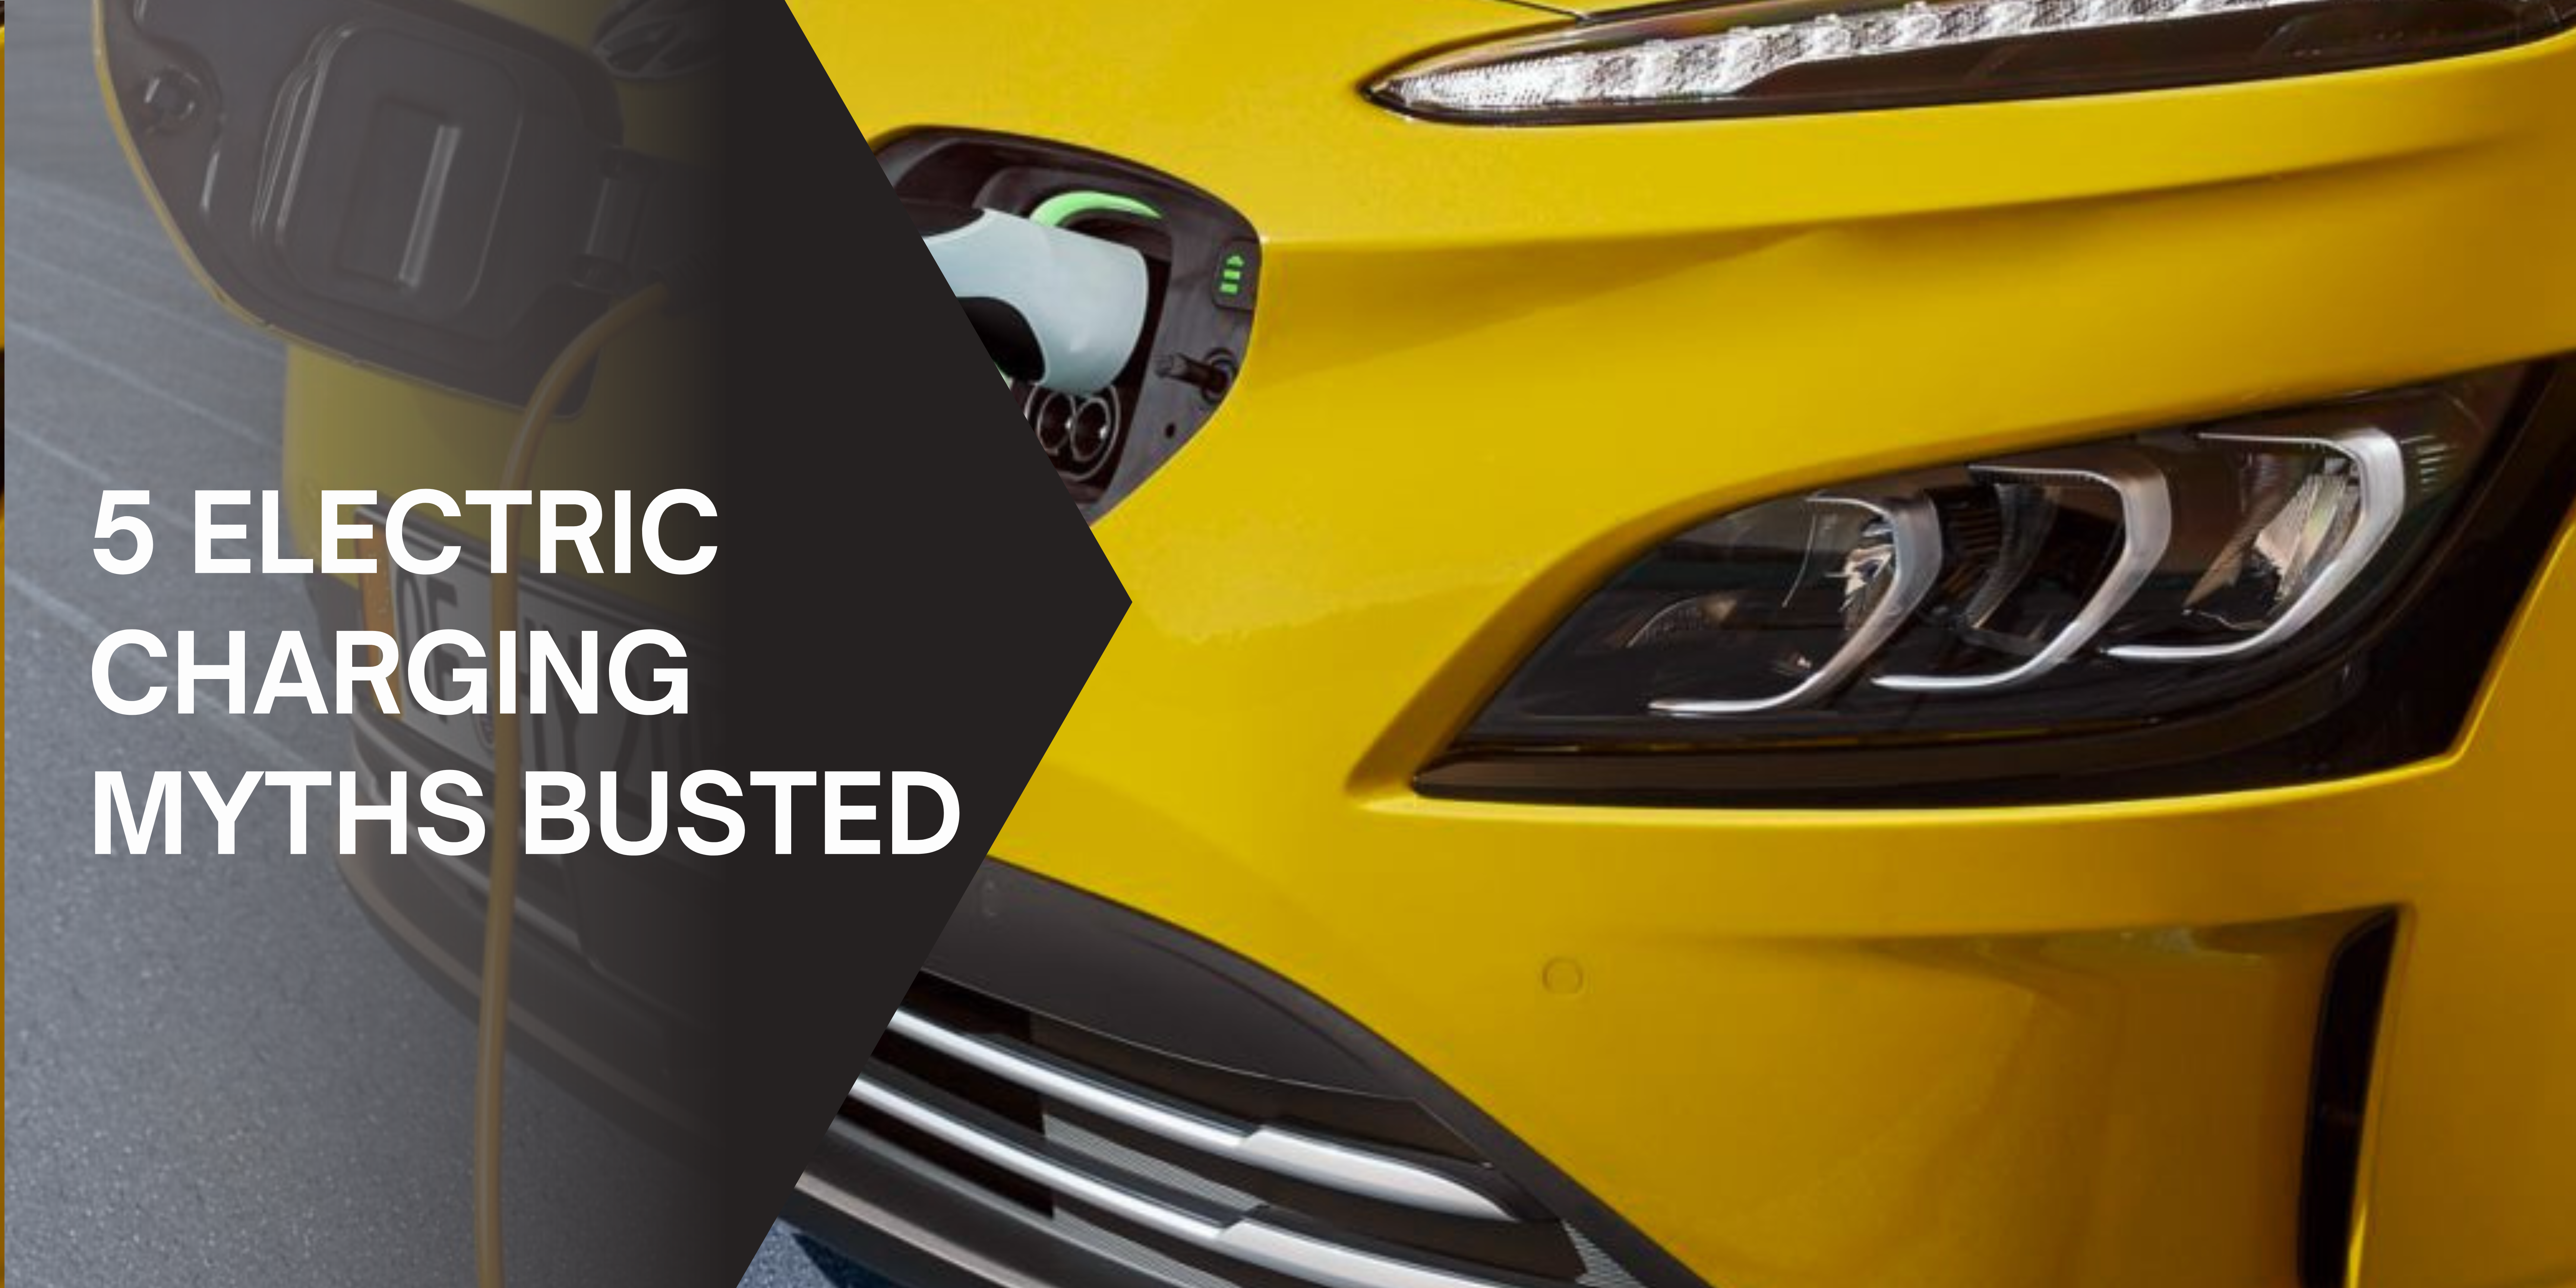 5 Electric Charging Myths Busted